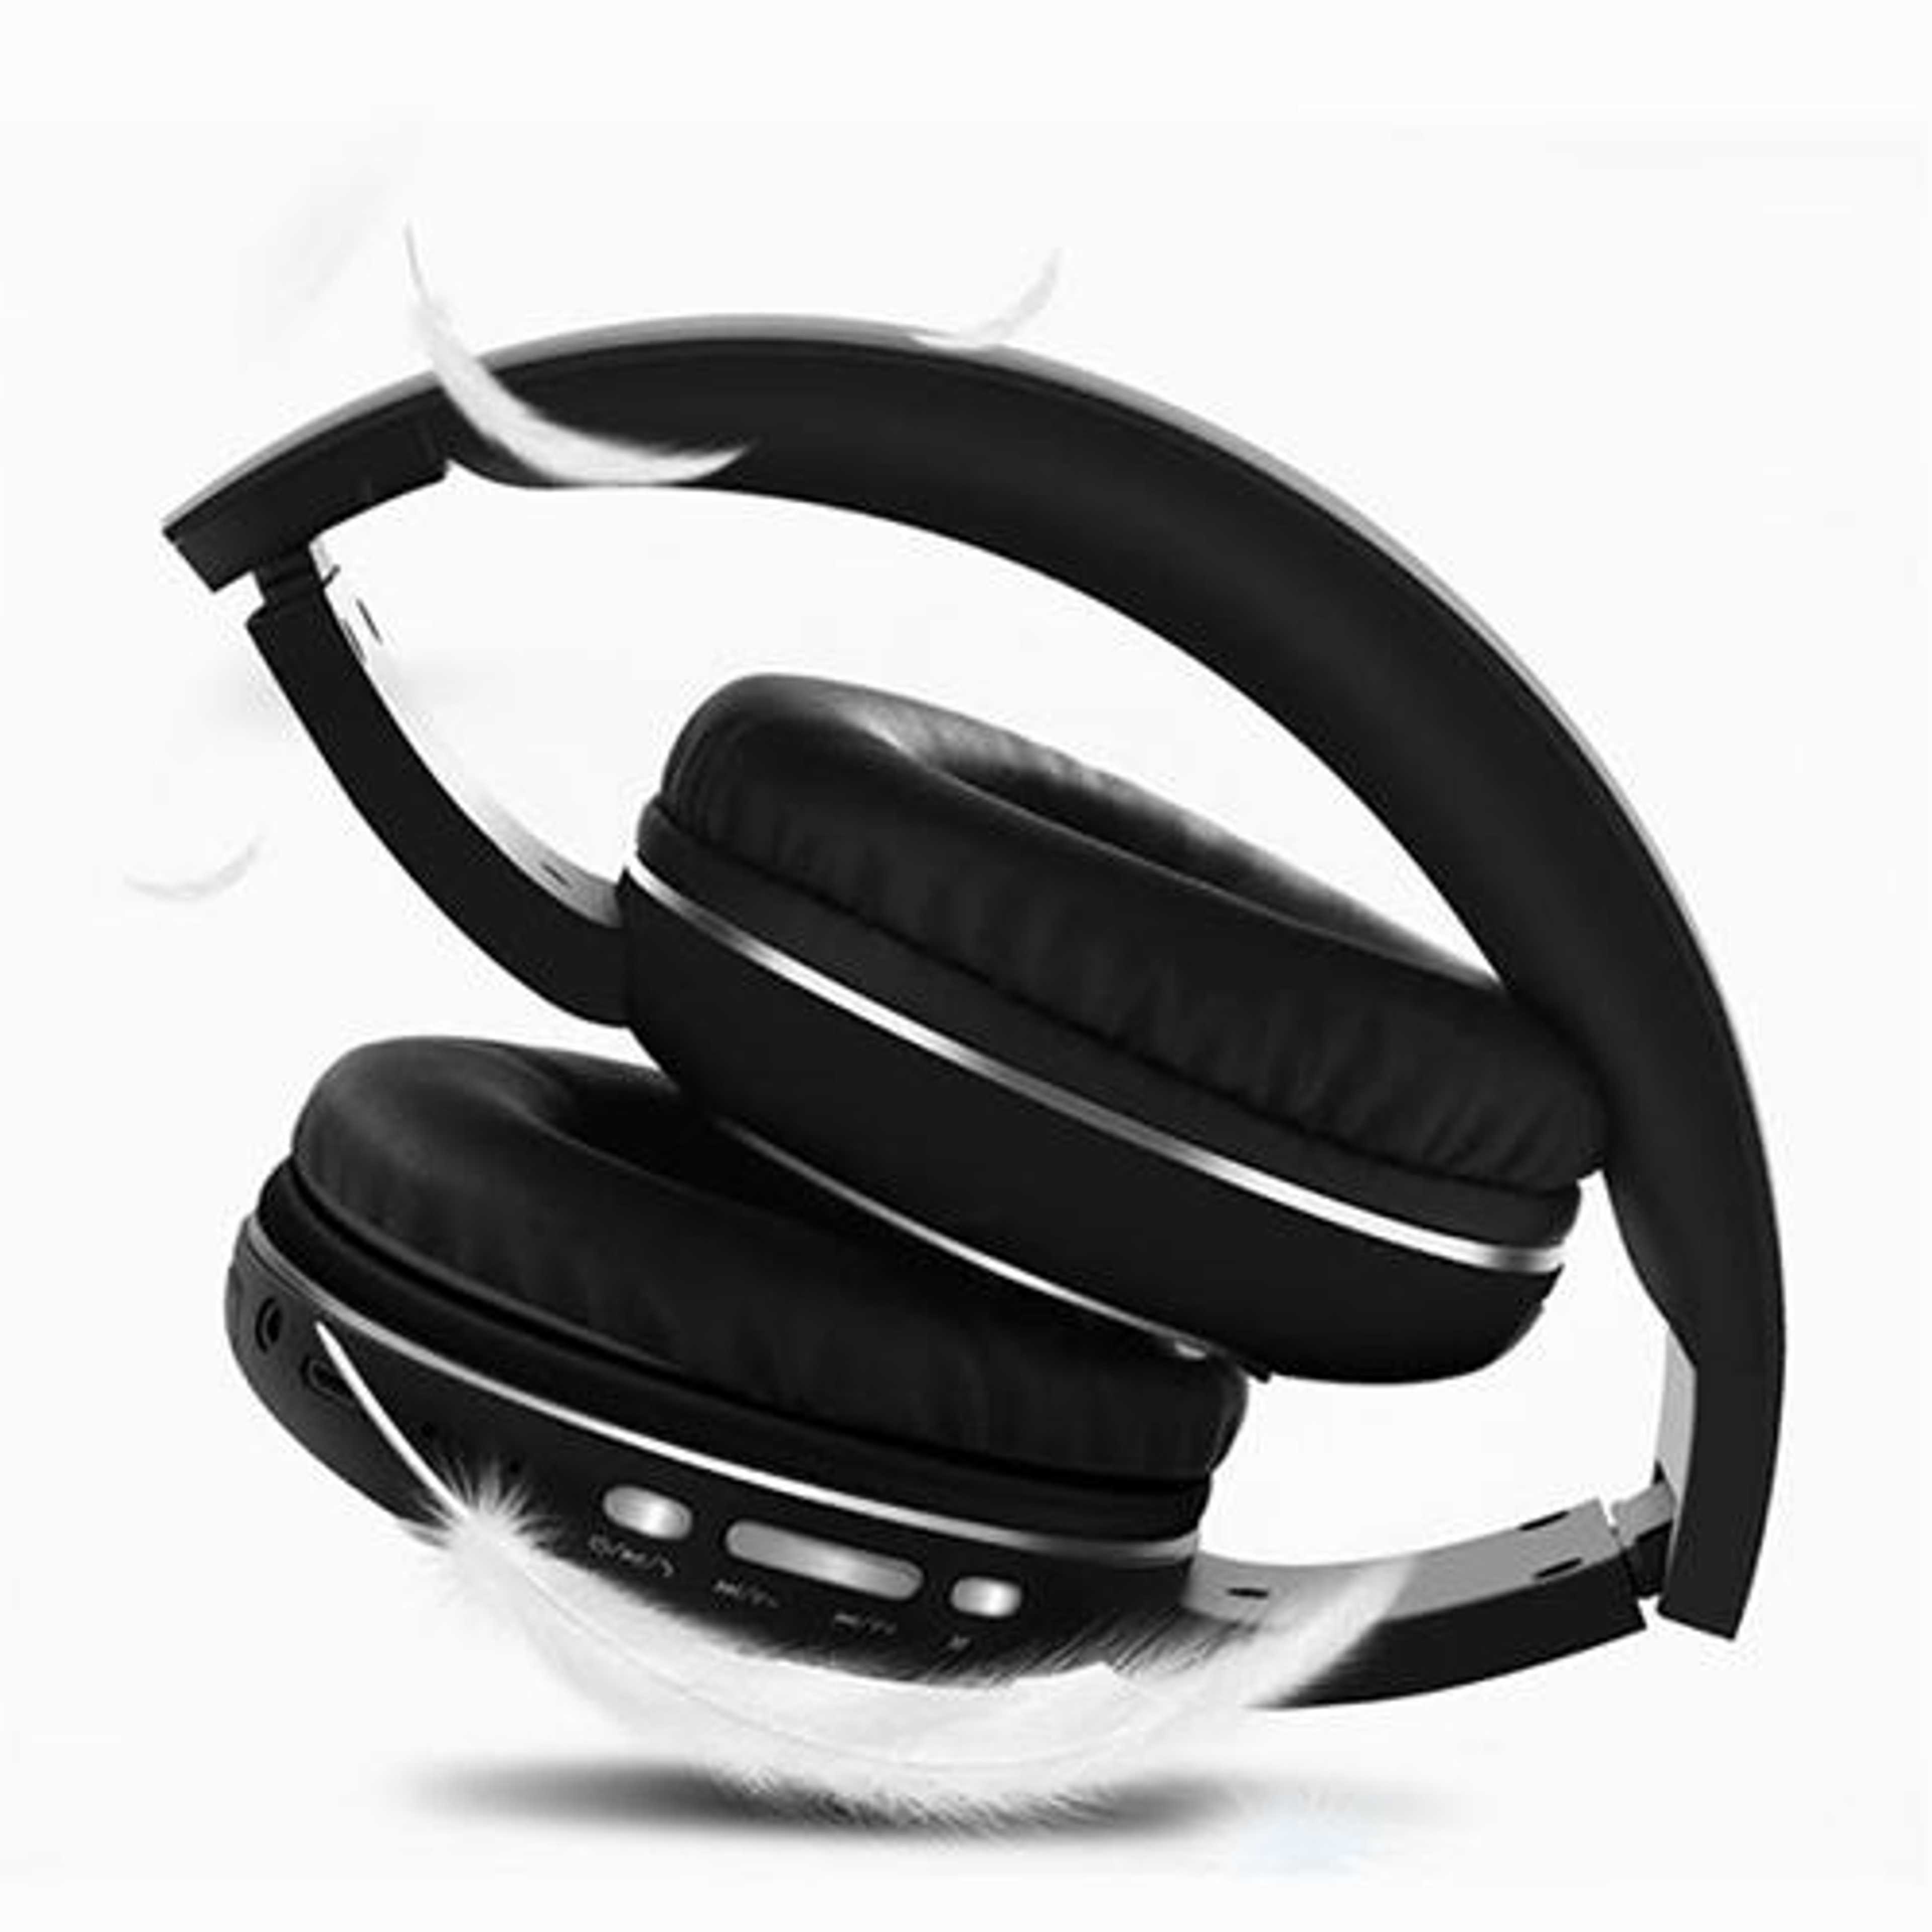 FASTER S4 HD Solo Wireless Stereo Headphones